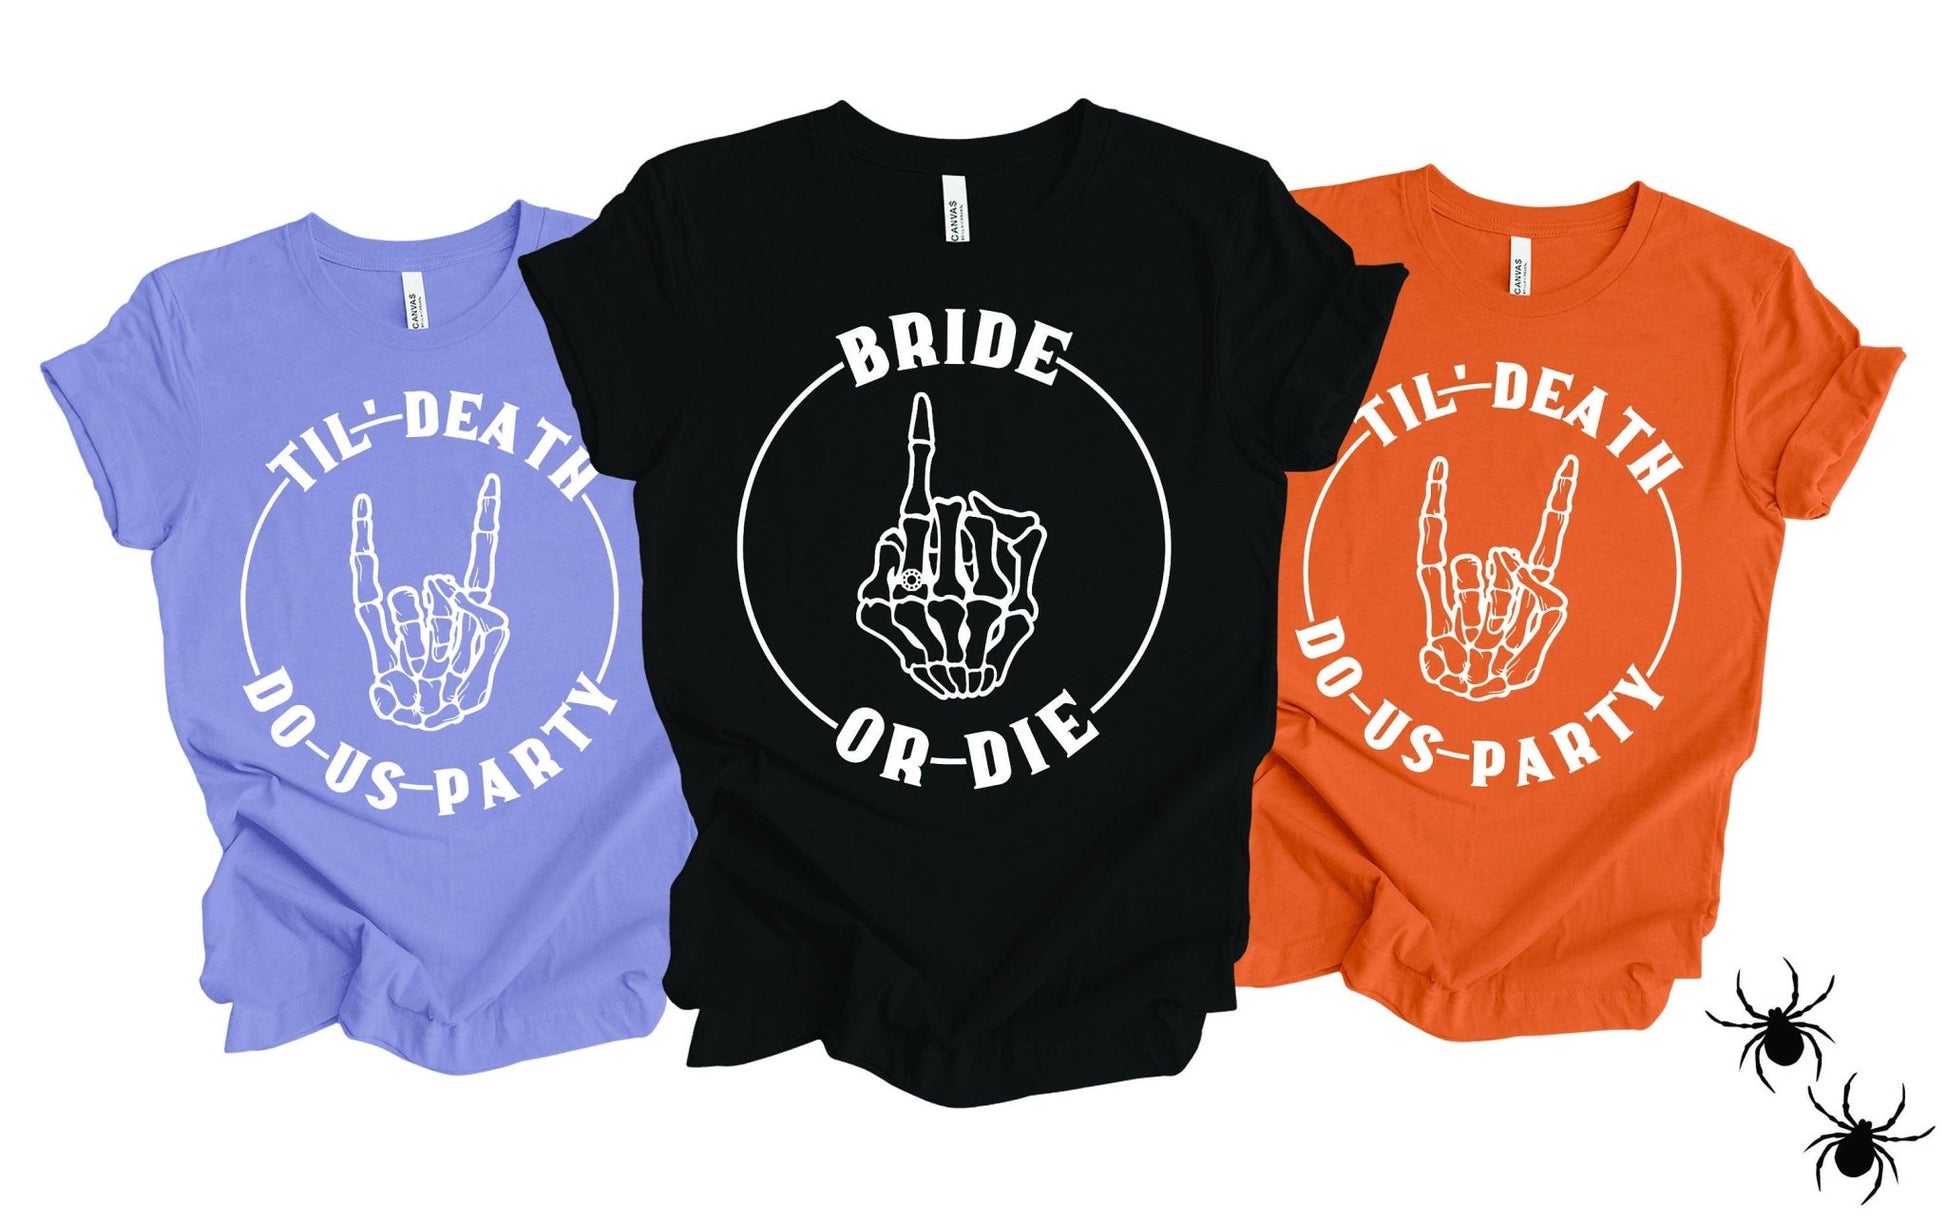 Bride or Die Bridesmaids Halloween Shirts Till Death Do Us Party Bachelorette Party T-Shirts - Squishy Cheeks